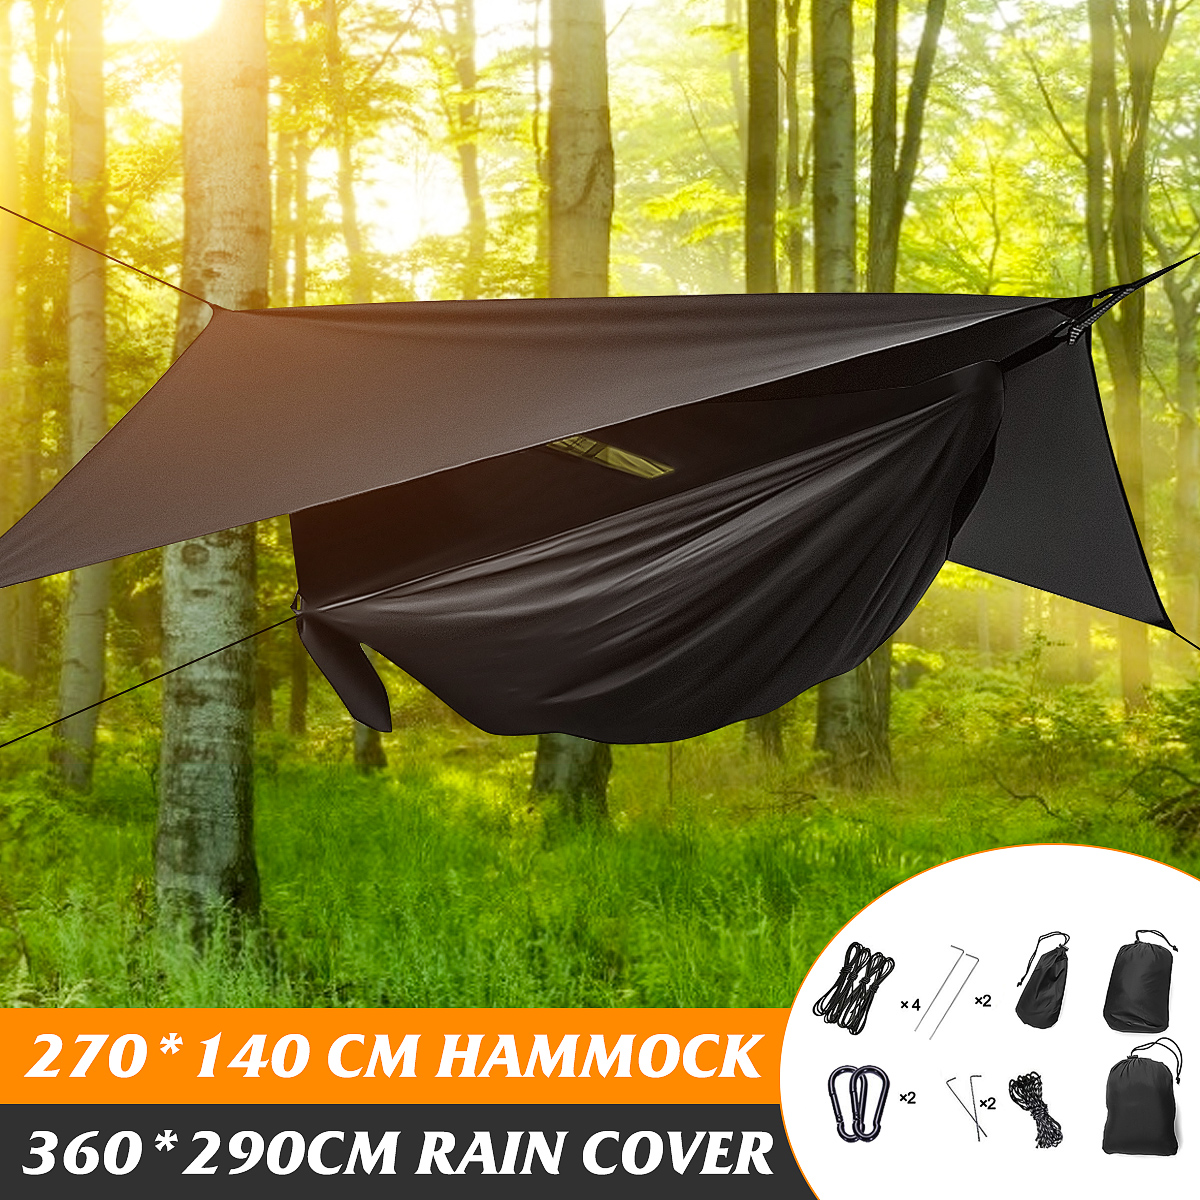 2-Persons-2-in-1-Camping-Canopy-Hammock-Tent-Set-Lightweight-Portable-Hammock-Outdoor-Camping-Travel-1888973-1